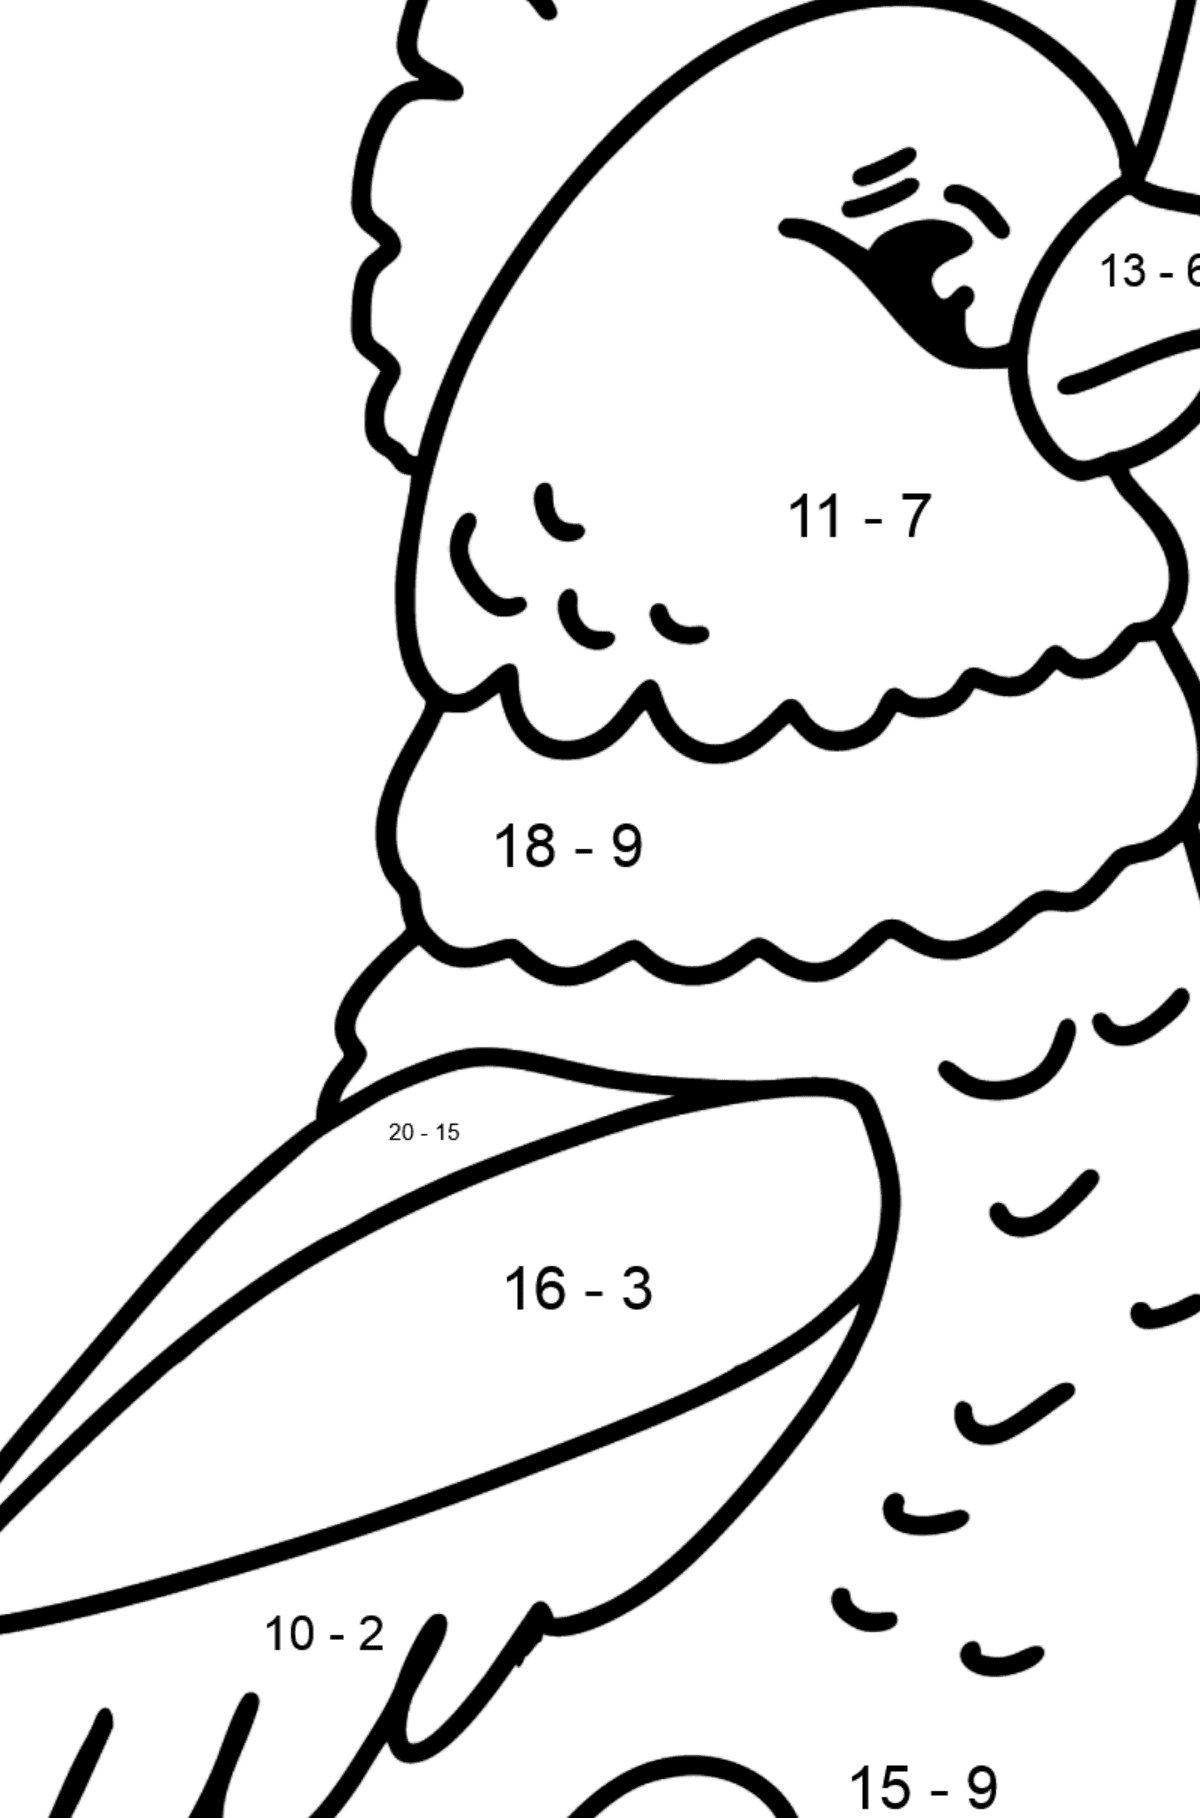 Cockatoo coloring page - Math Coloring - Subtraction for Kids